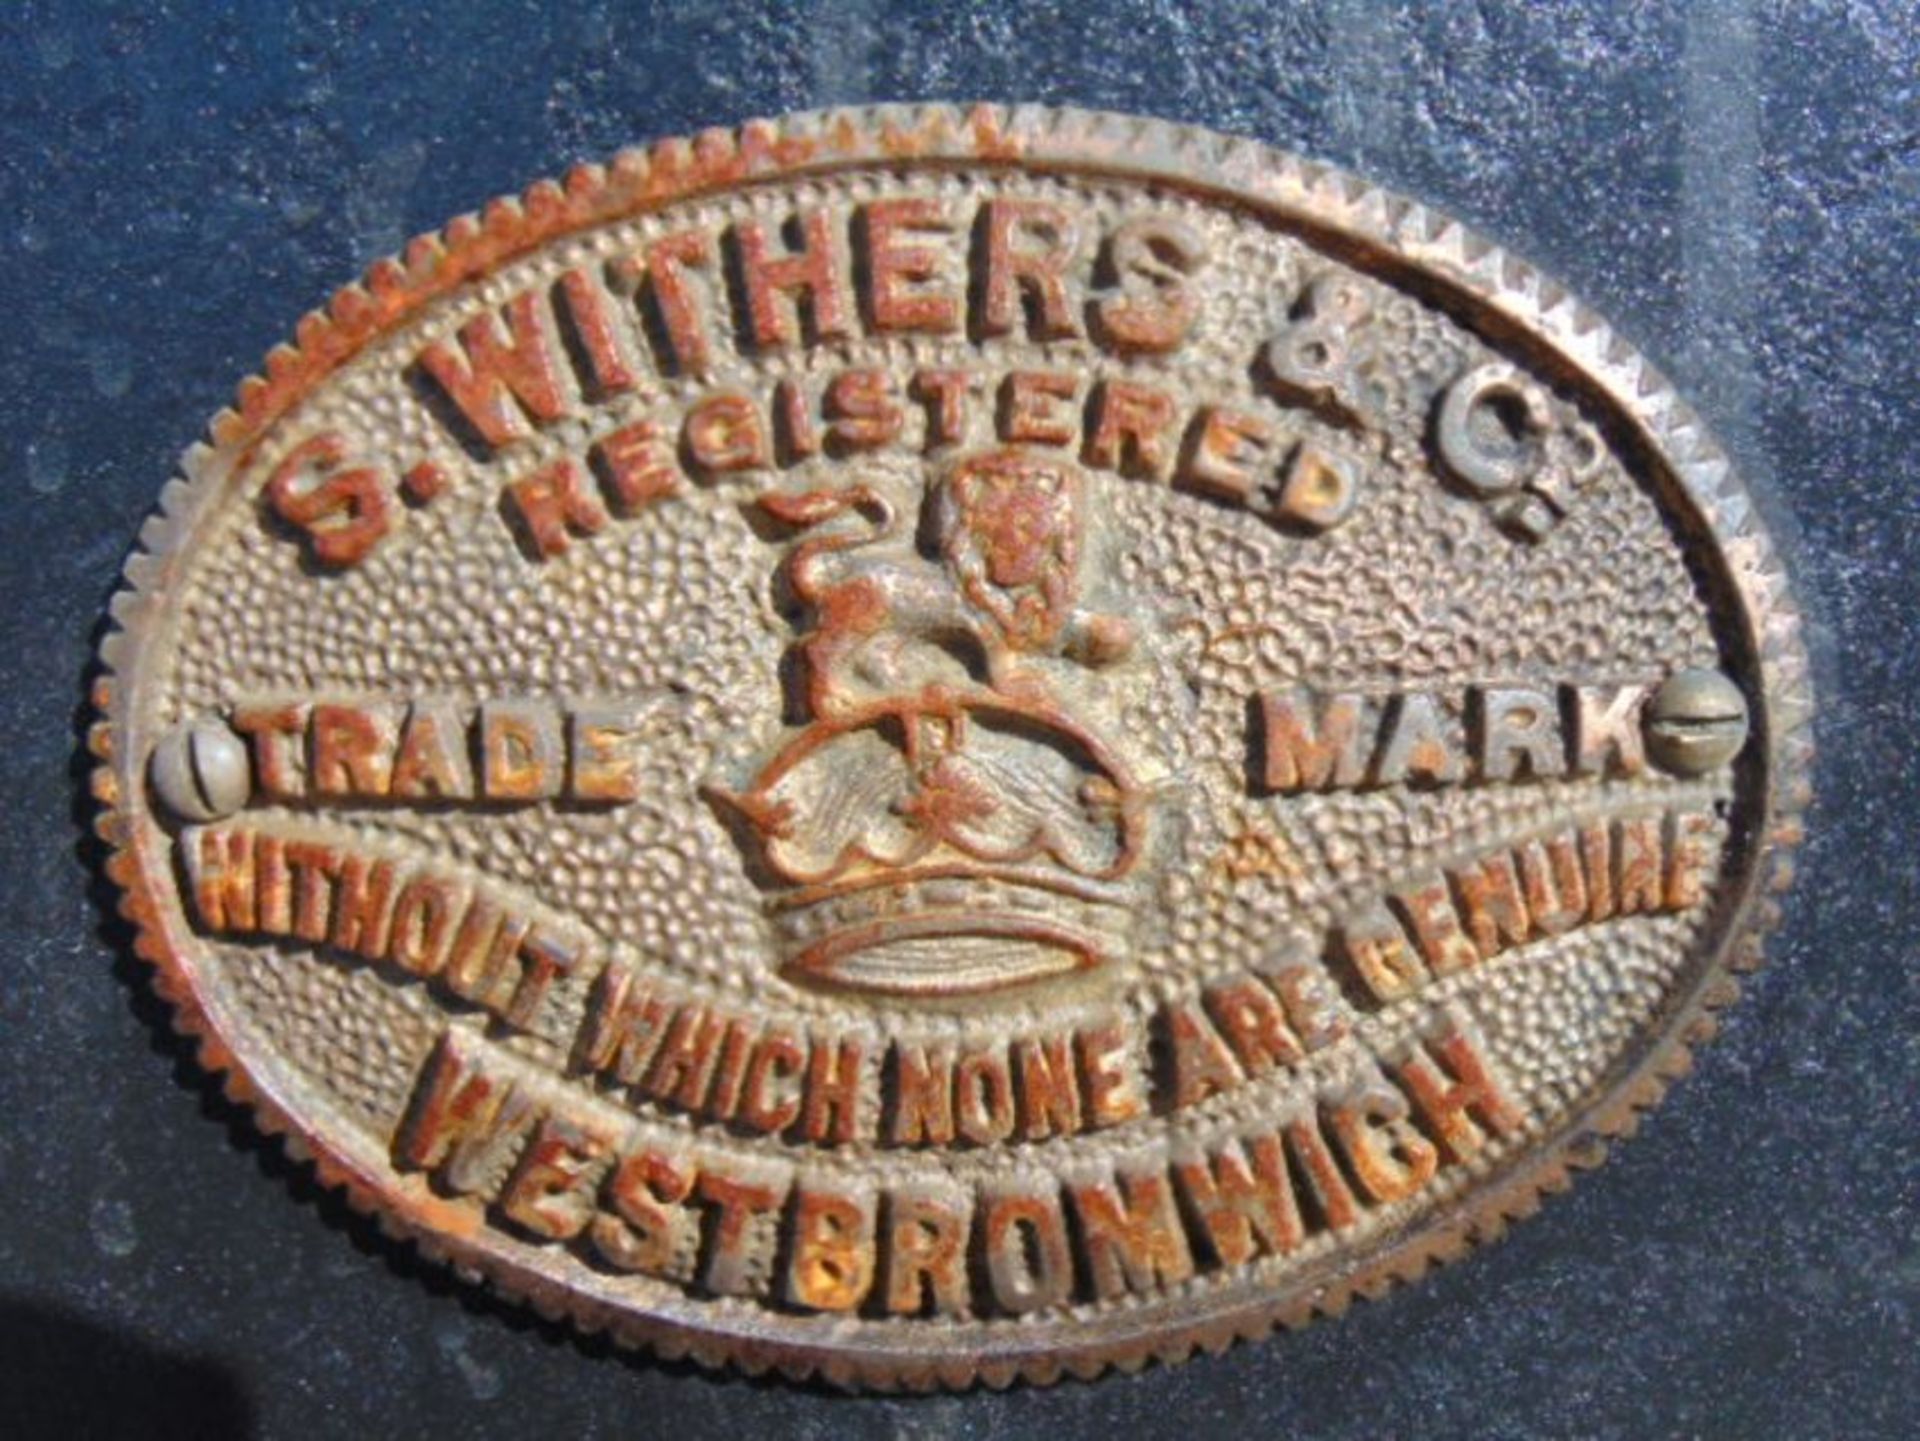 Vintage S.Withers & Co Safe C/W Keys as shown - Image 7 of 9